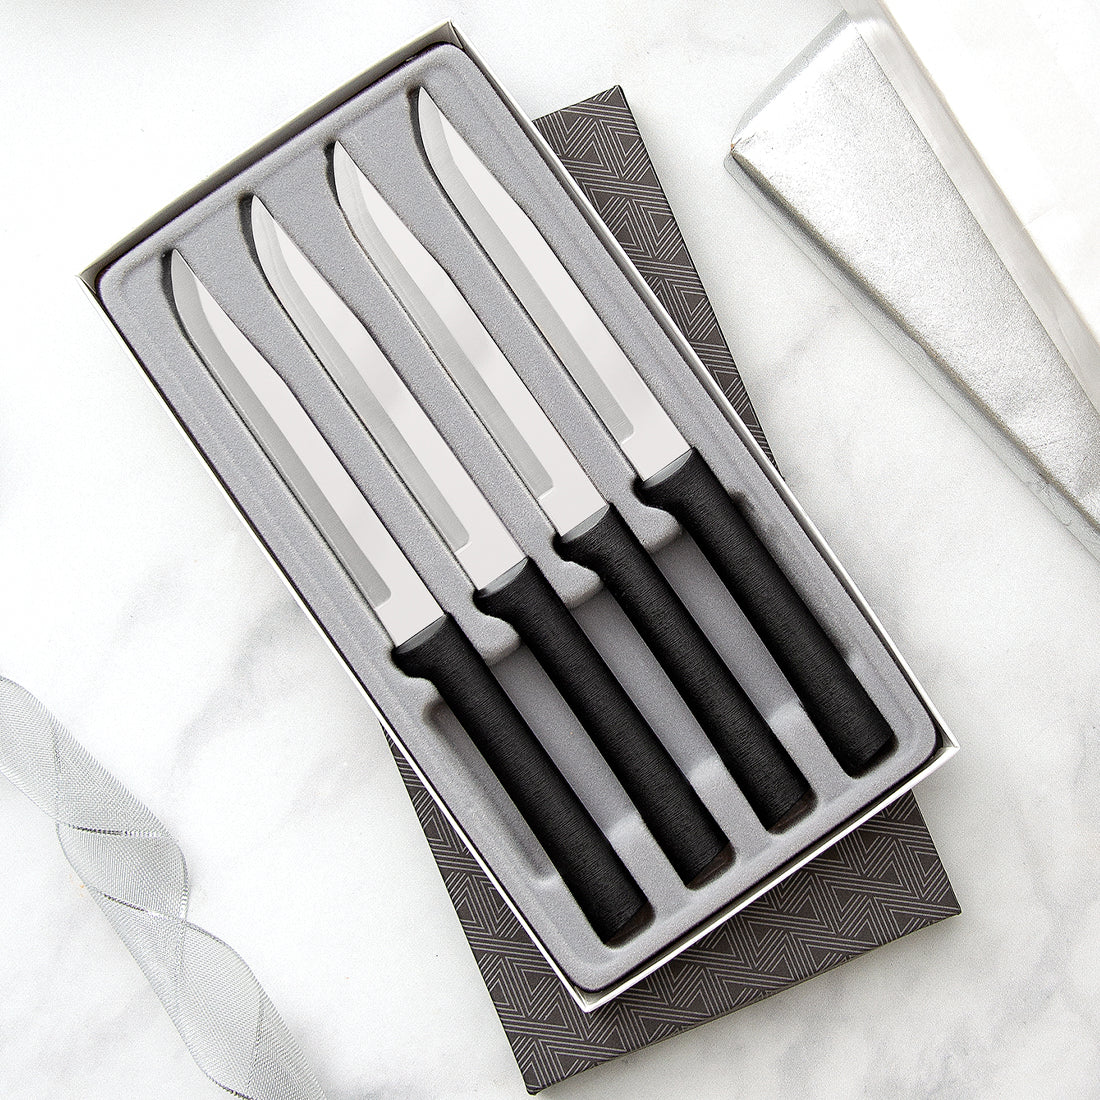 Four Utility/Steak Knives Gift Set with silver handles in a black-lined gift box. 